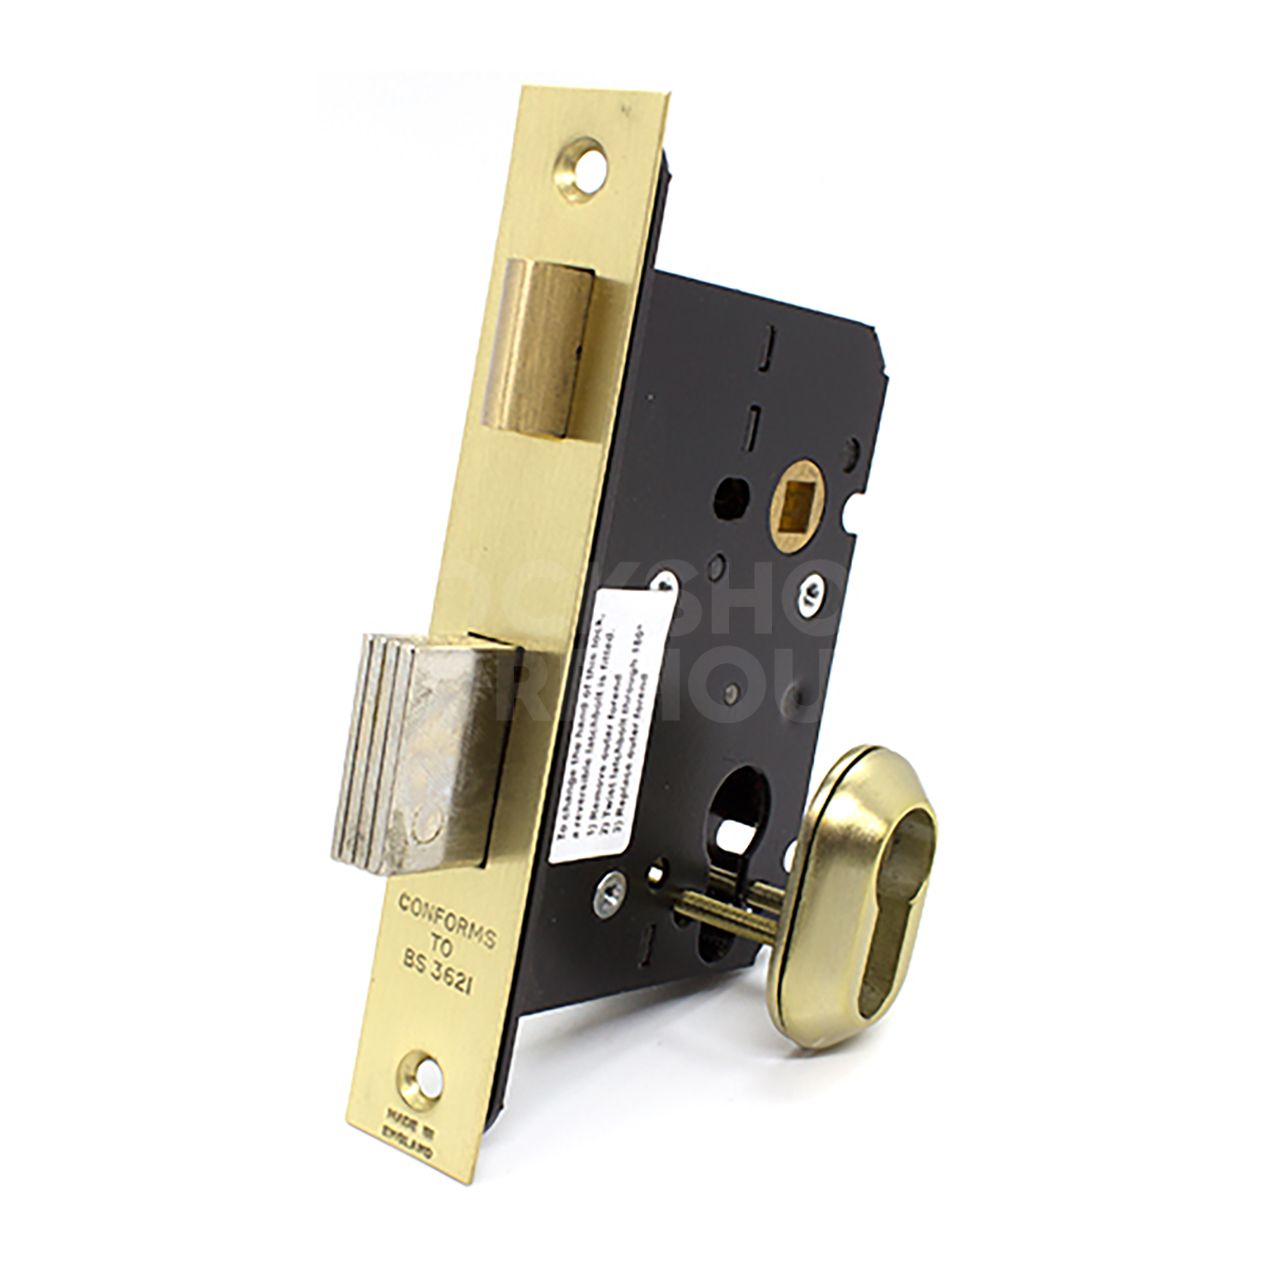 Imperial G7130 BS3621 Euro Profile Cylinder Sashlock with Security Escutcheons